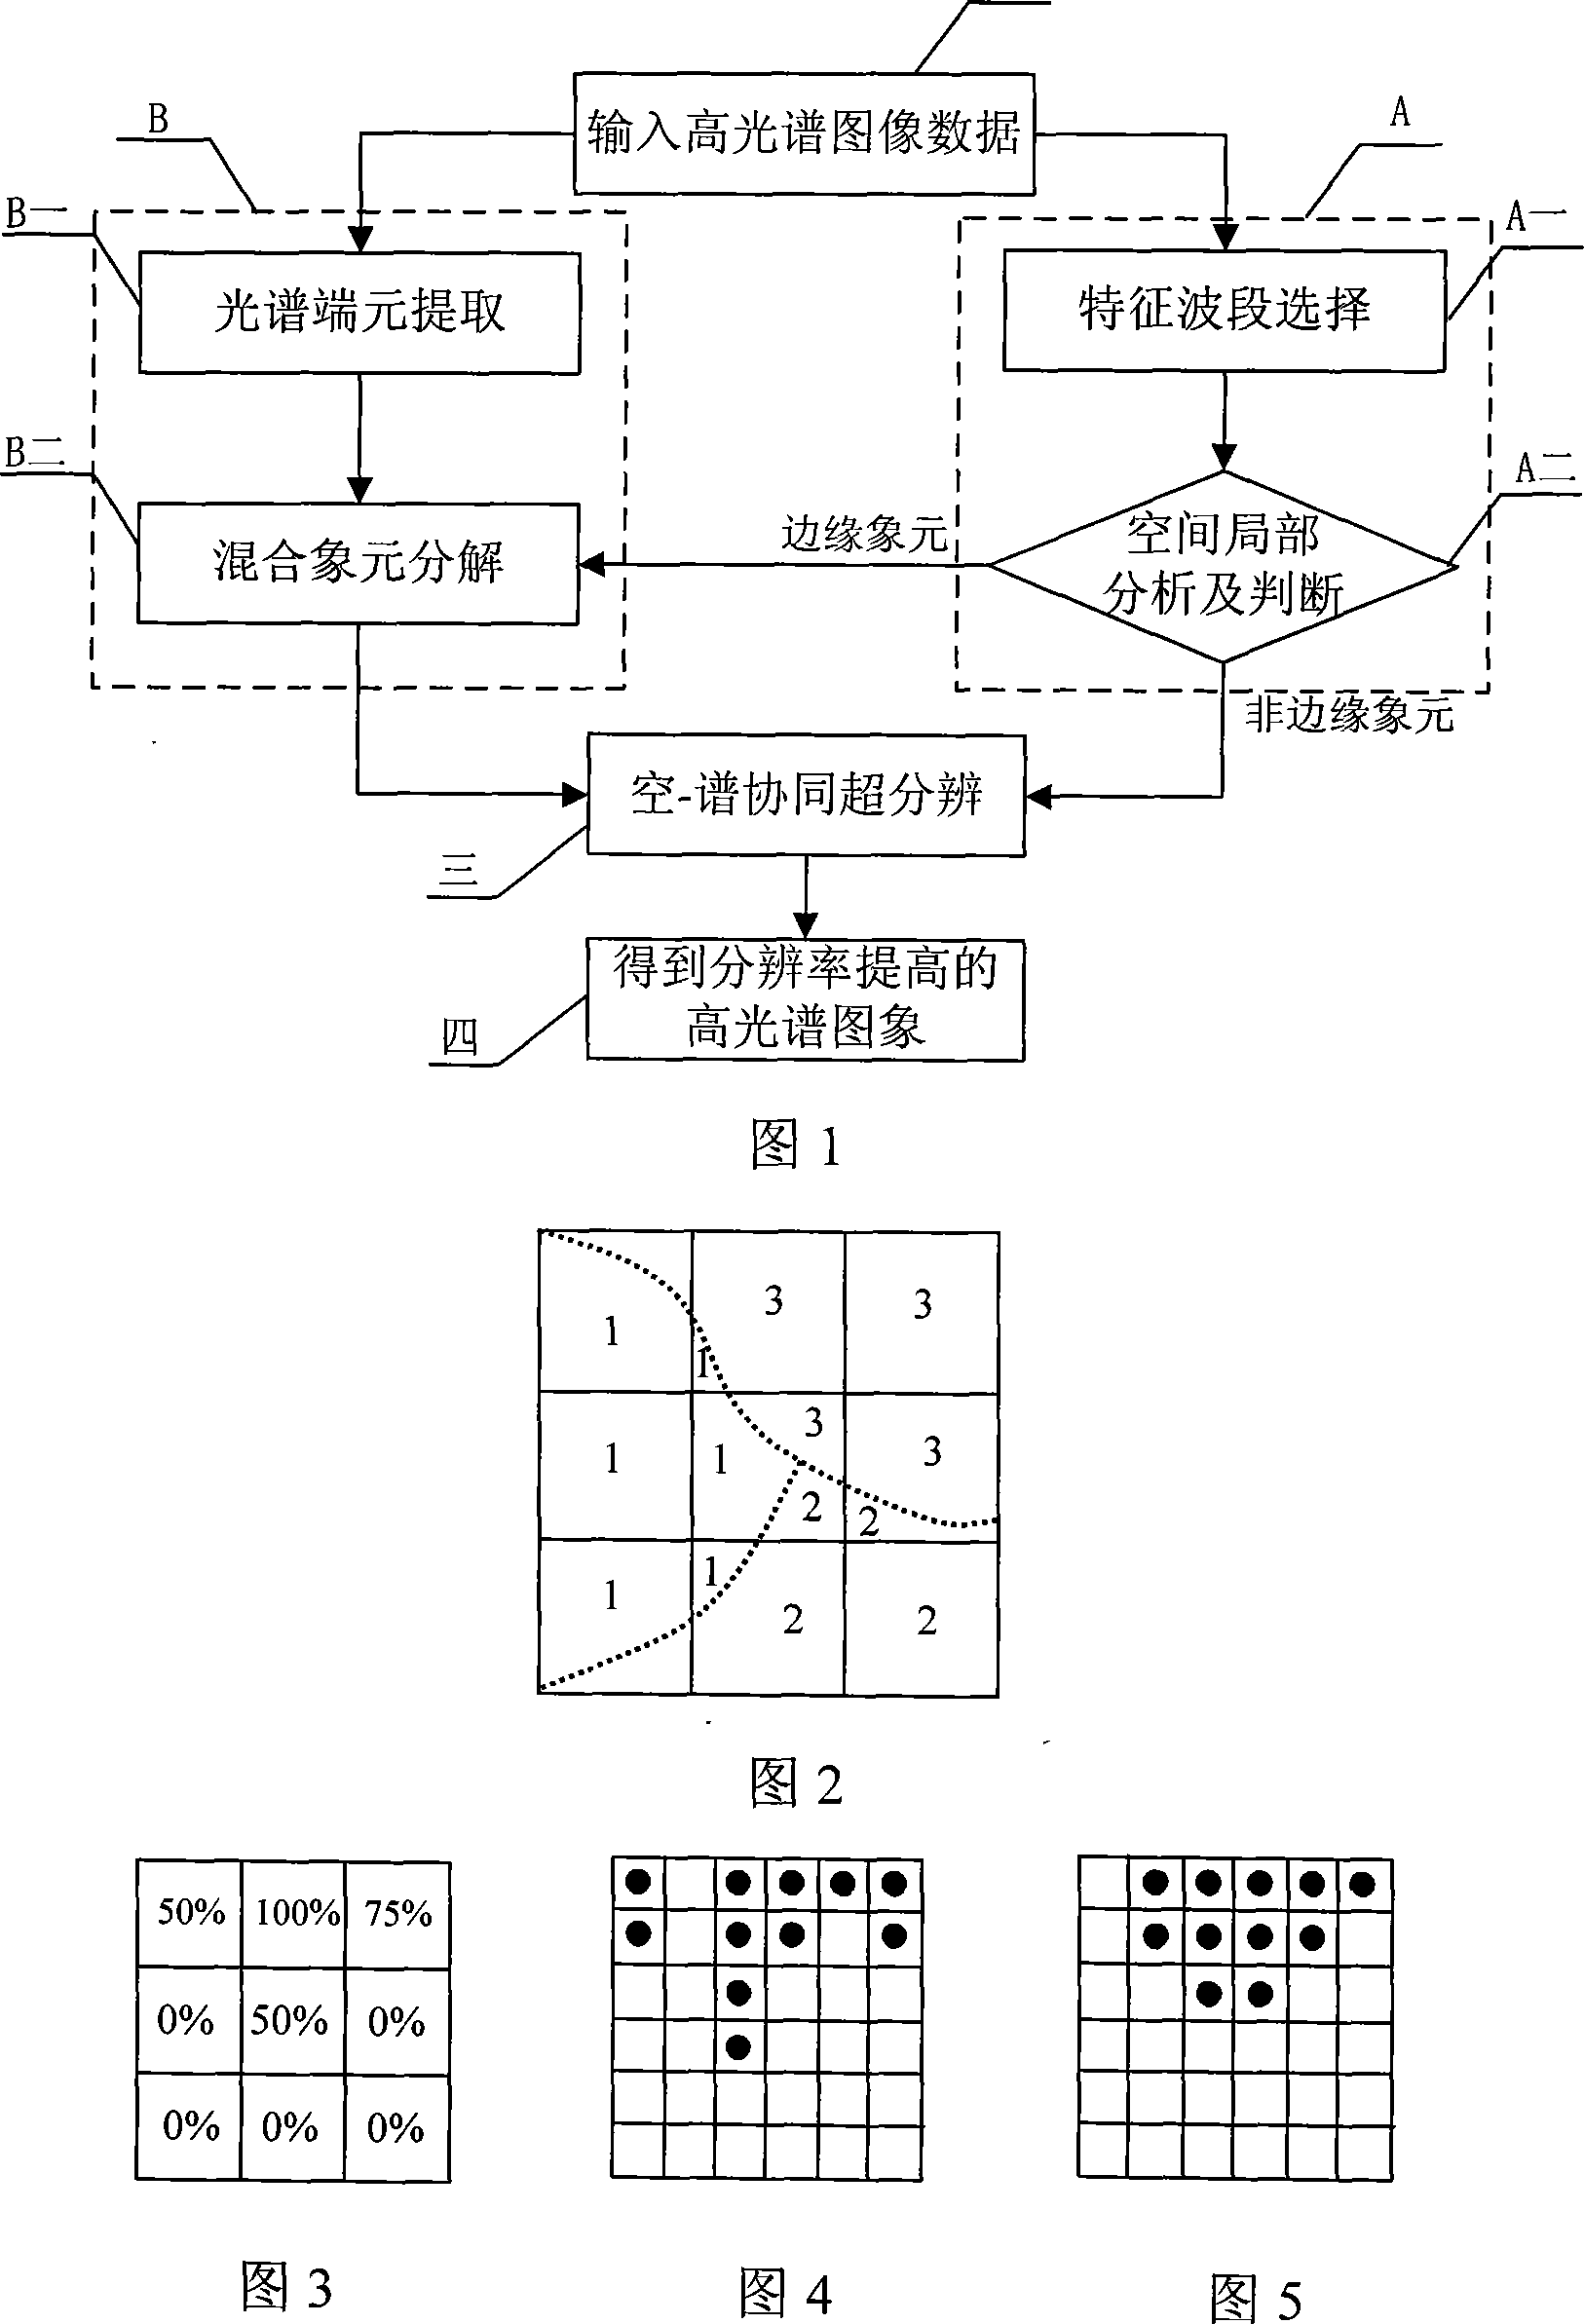 Method for enhancing distinguishability cooperated with space-optical spectrum information of high optical spectrum image